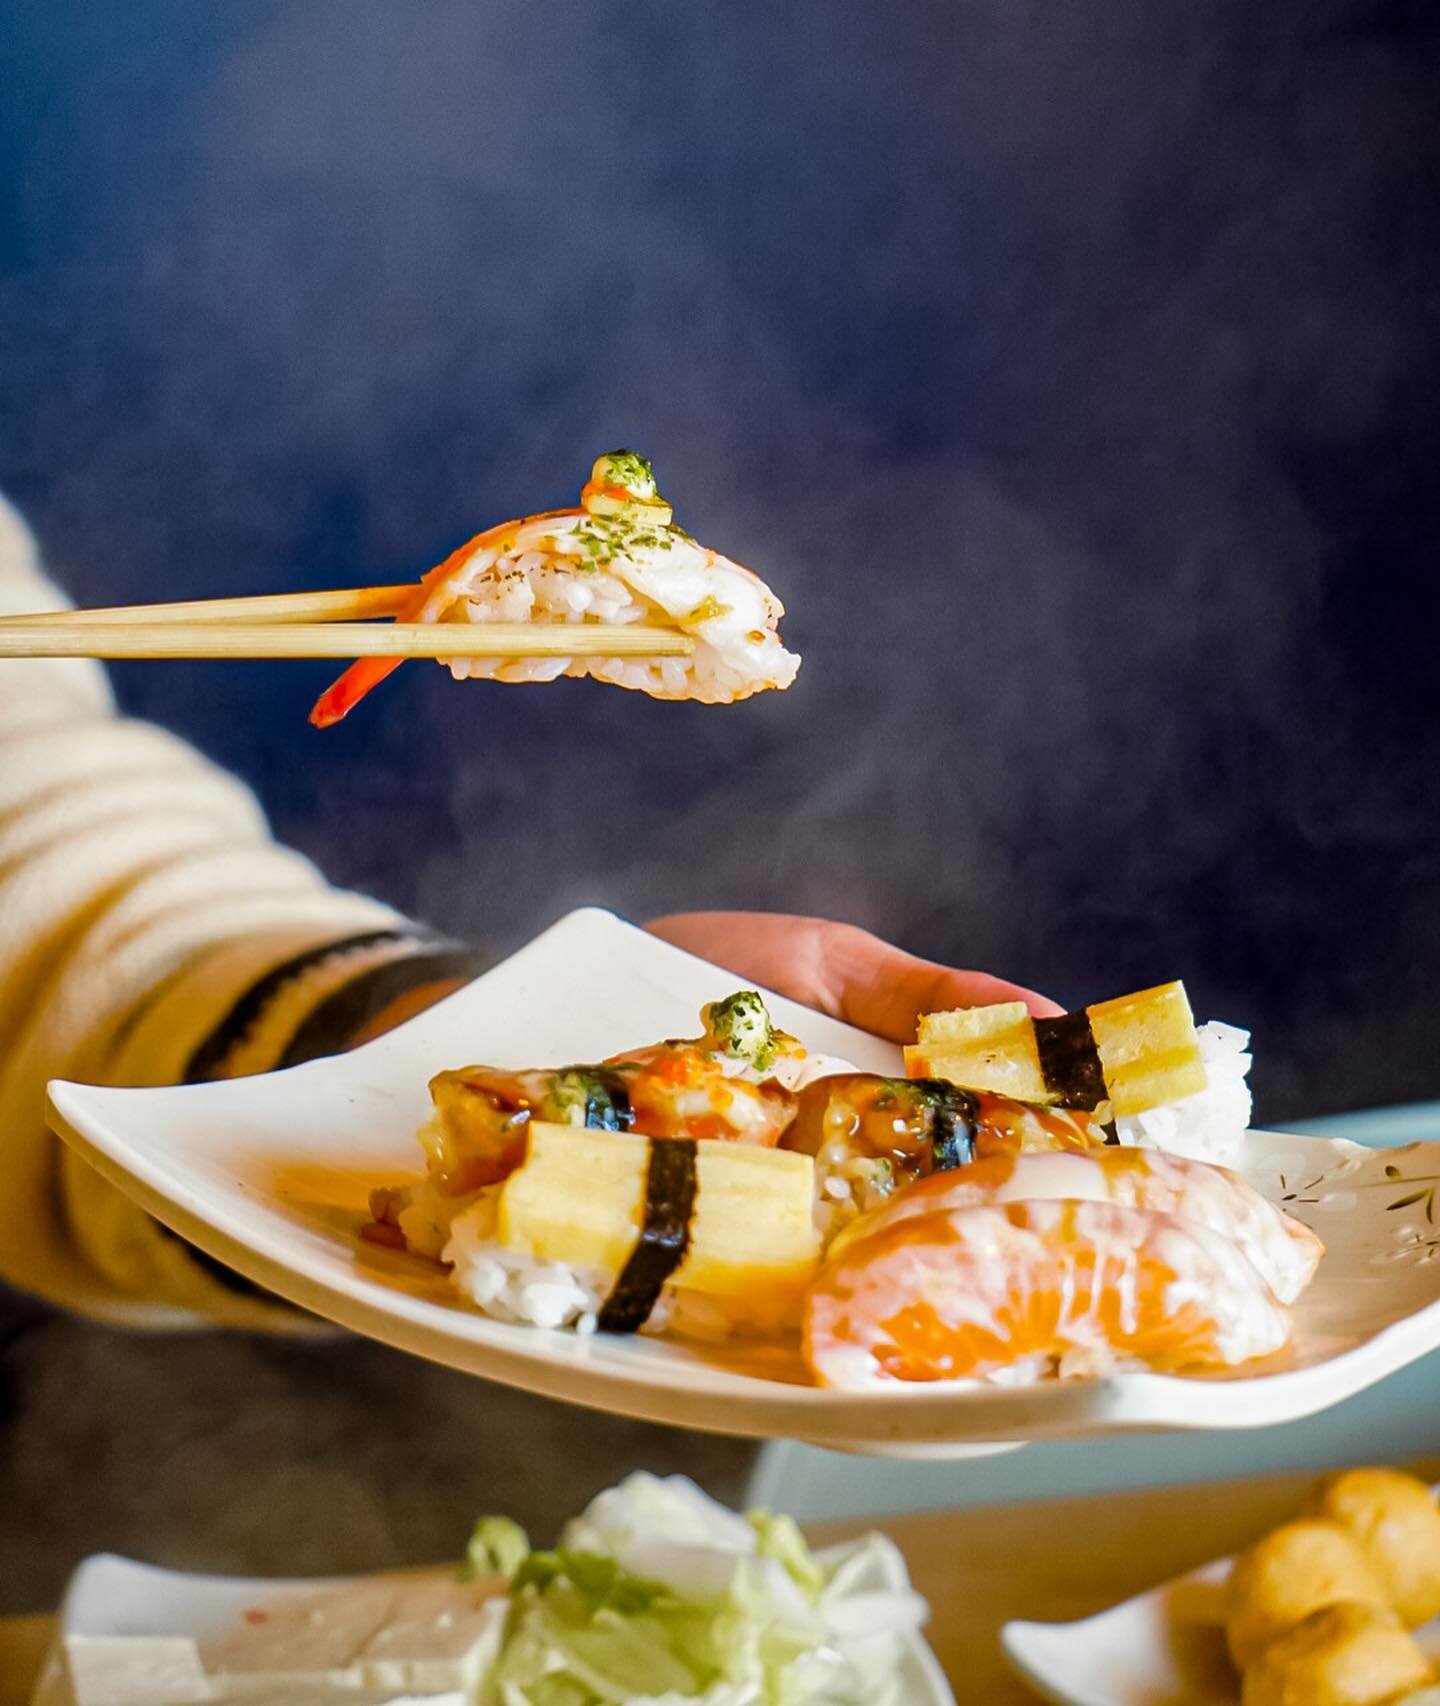 It&rsquo;s raining 🌧️ so time to warm yourself with delicious Shabu and sushi 🍣😋

Make a reservation
☎️ 07 3211 5407
1/70 Mary St, Brisbane City QLD 4000